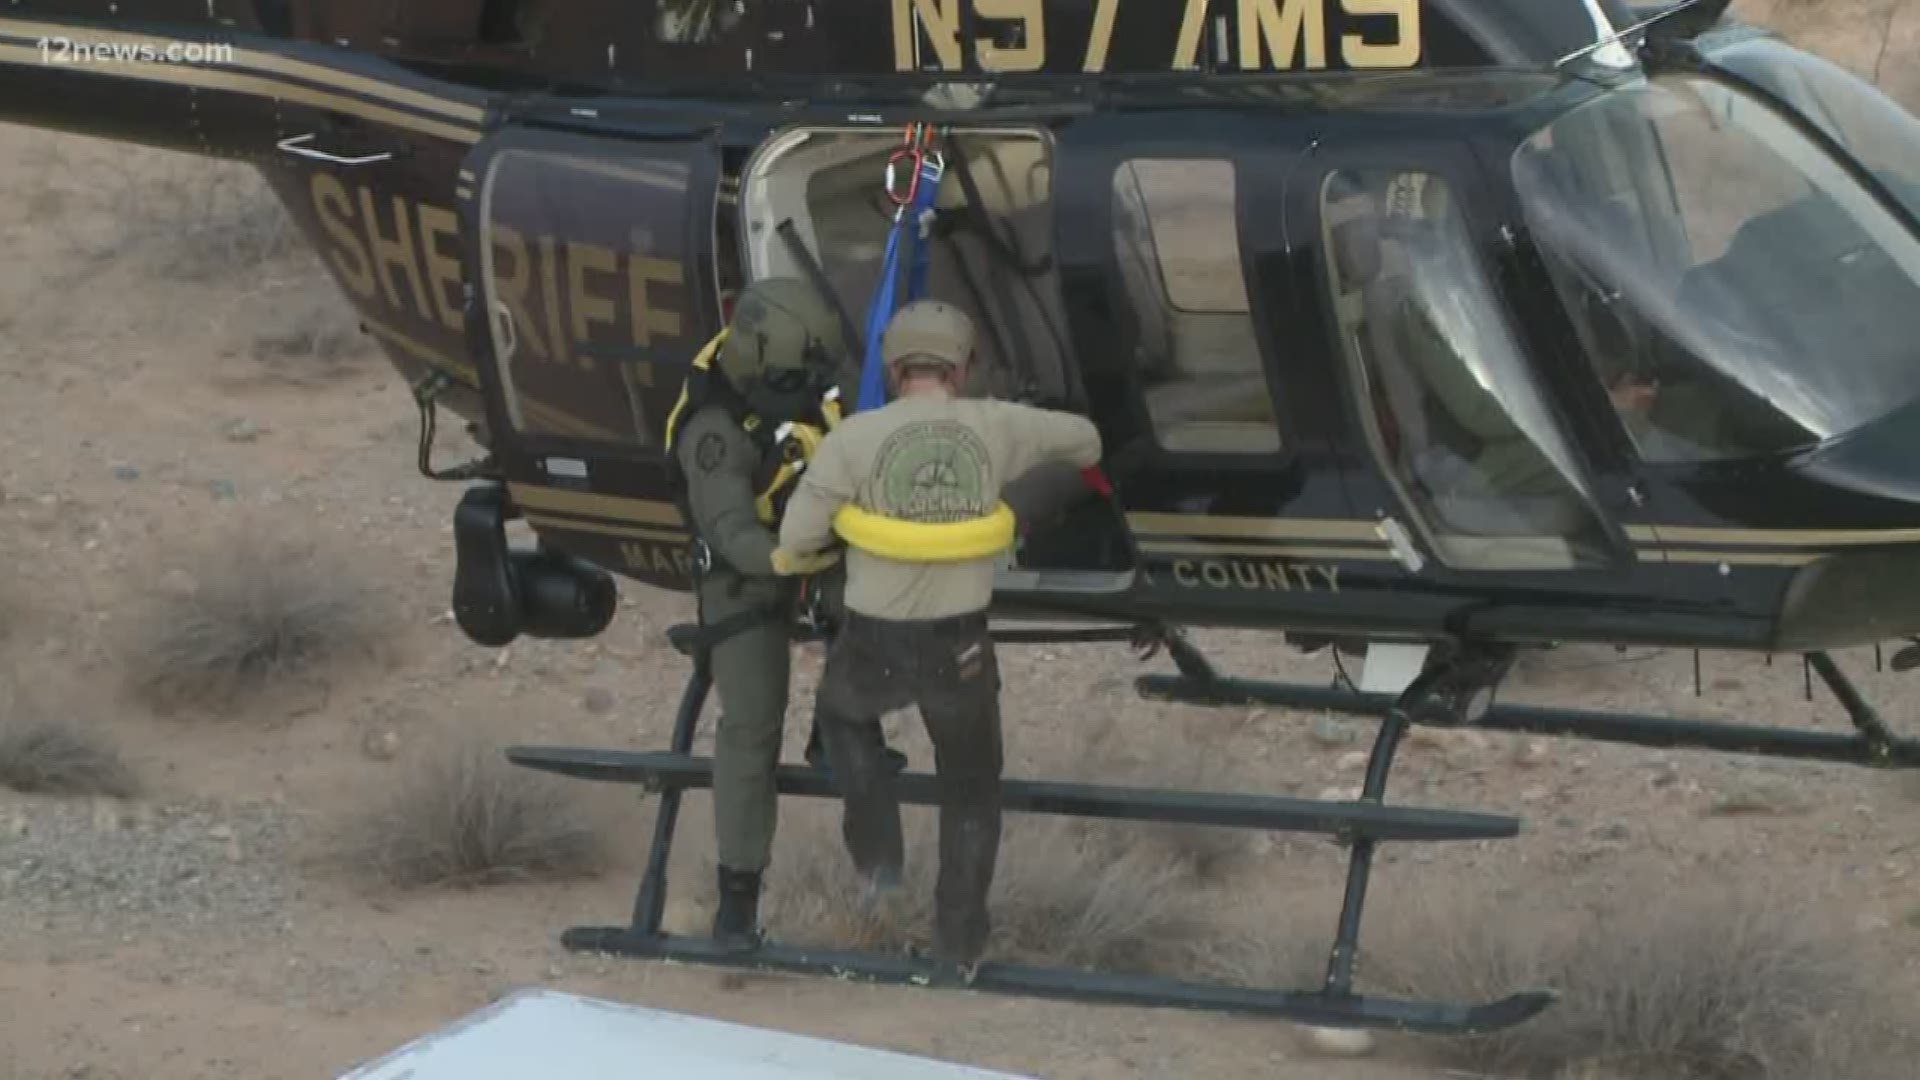 The Maricopa County Sheriff's Office practices rescuing people from cars stuck in water.